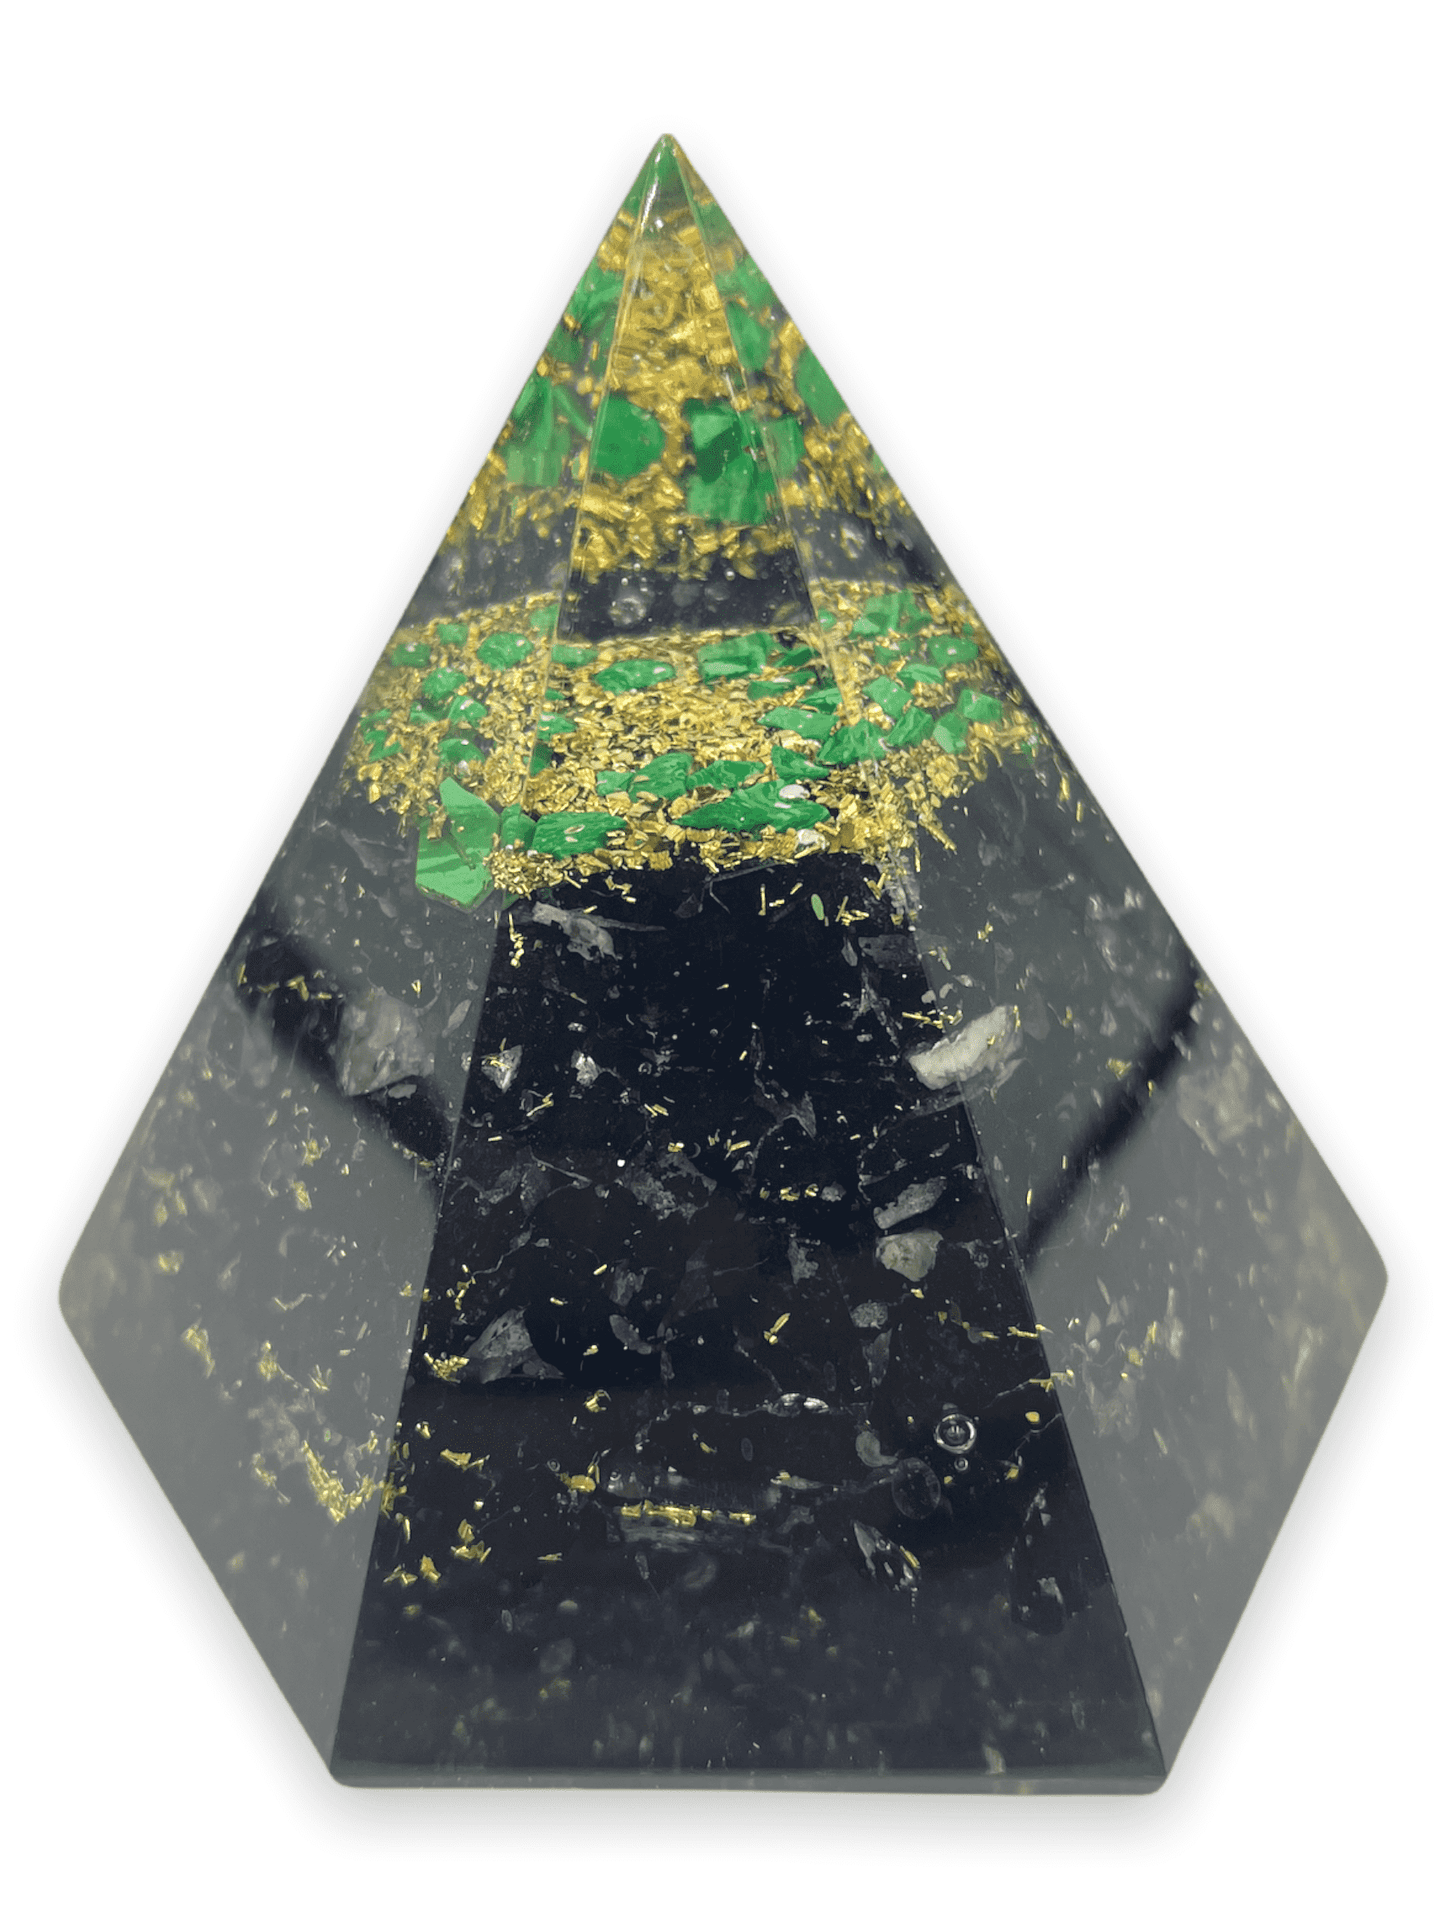 Ancient Infusions Shungite & Malachite Orgonite Pyramid - Experience EMF protection and harmonized energy with the power of Shungite, Malachite, and orgonite technology.